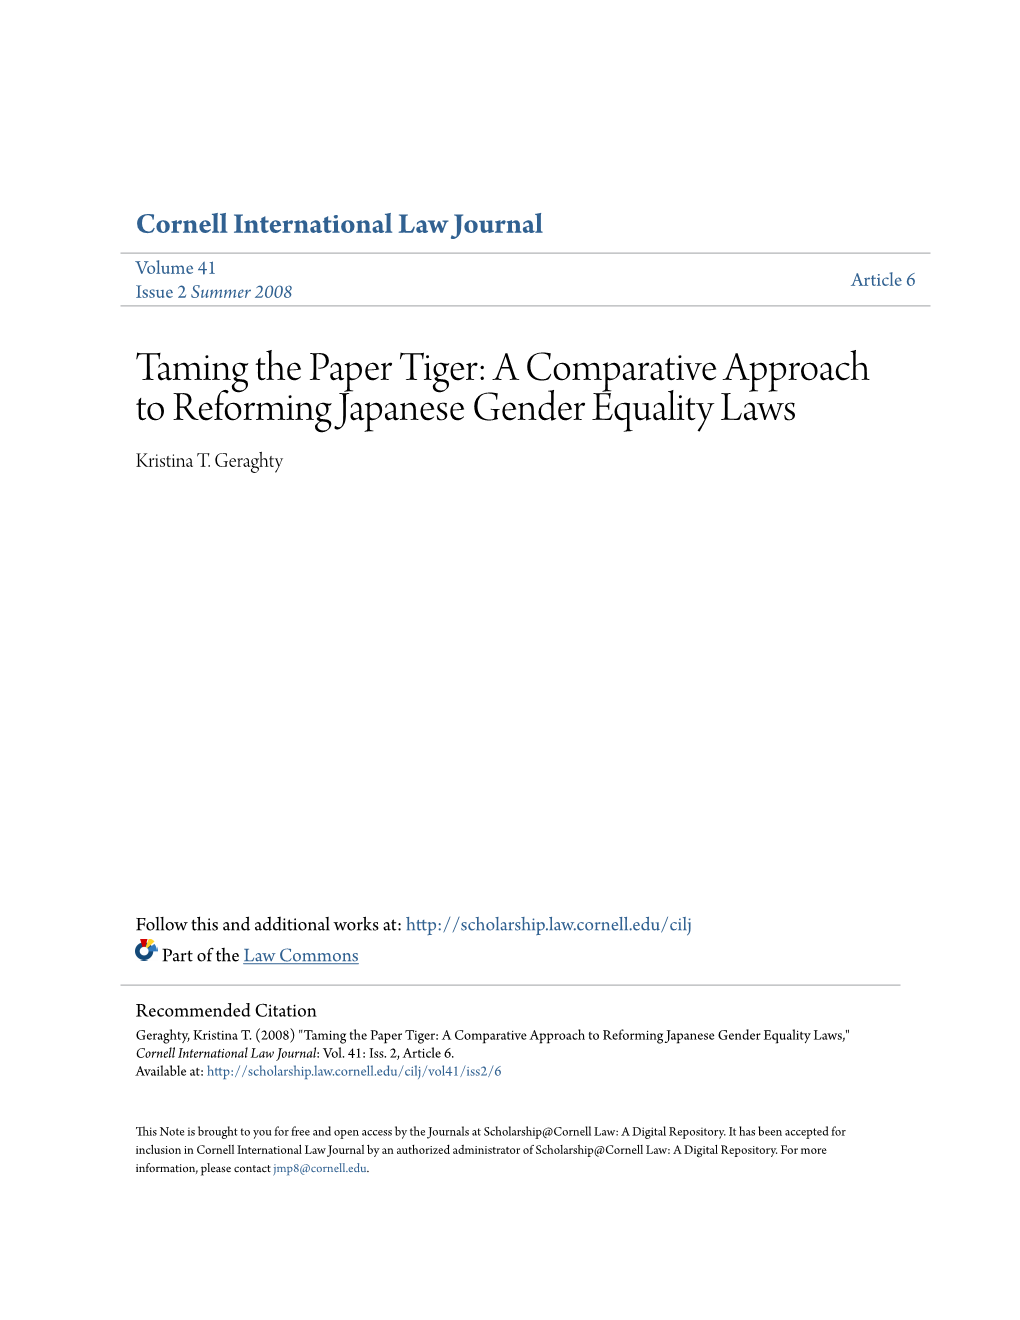 A Comparative Approach to Reforming Japanese Gender Equality Laws Kristina T